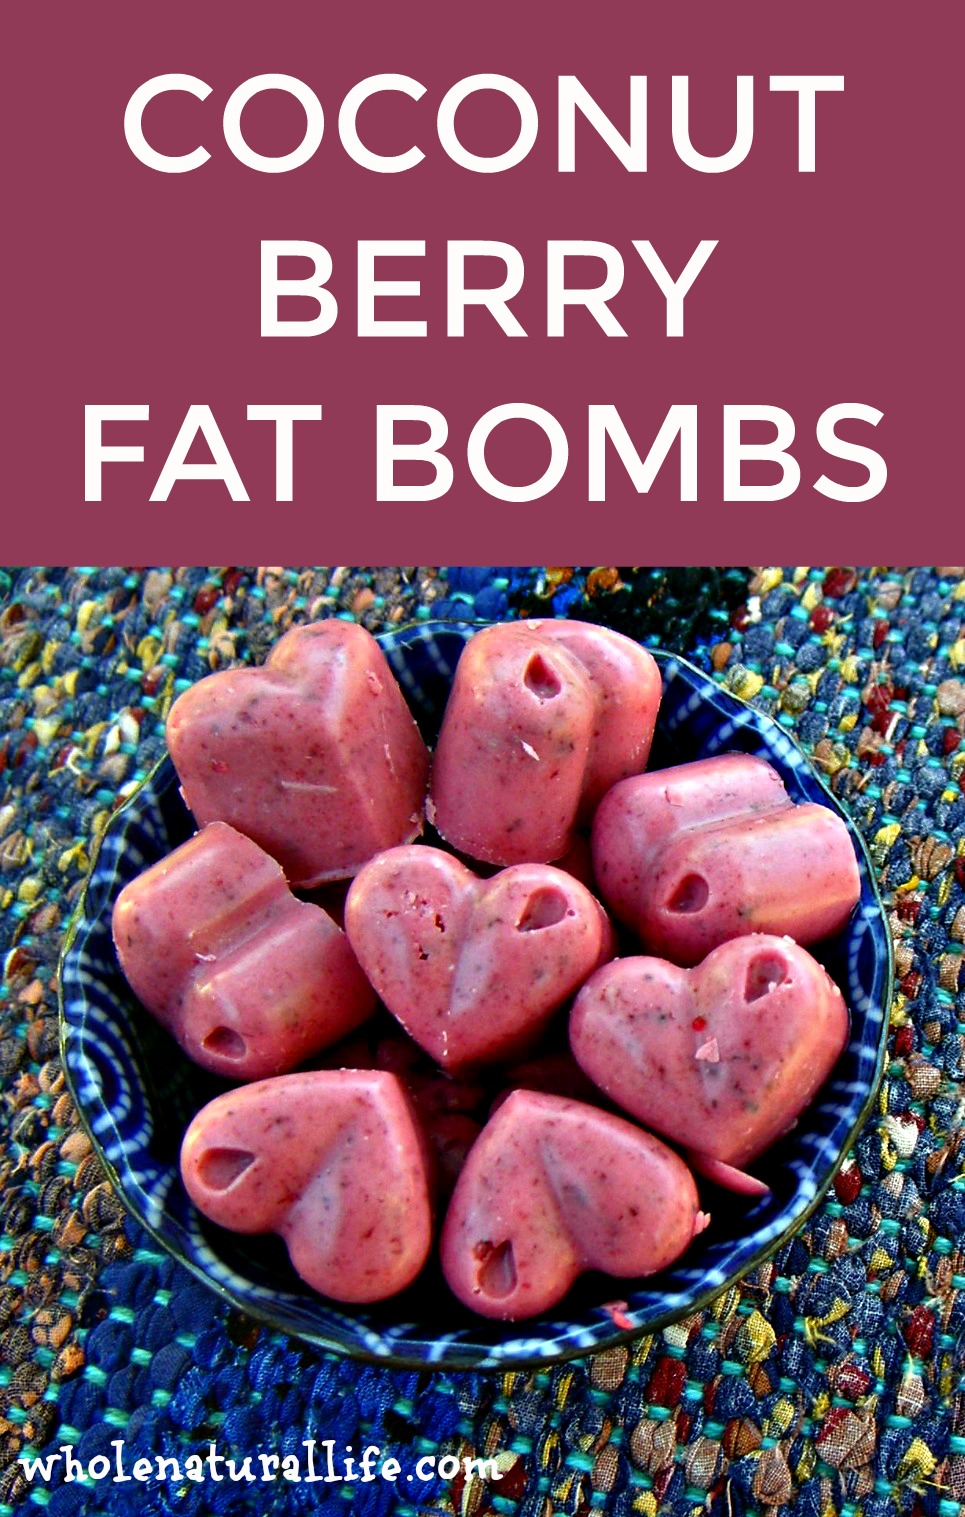 Coconut Berry Fat Bombs: A Delicious Way to Eat More Coconut Oil - Whole Natural Life -   18 diet Snacks coconut oil ideas